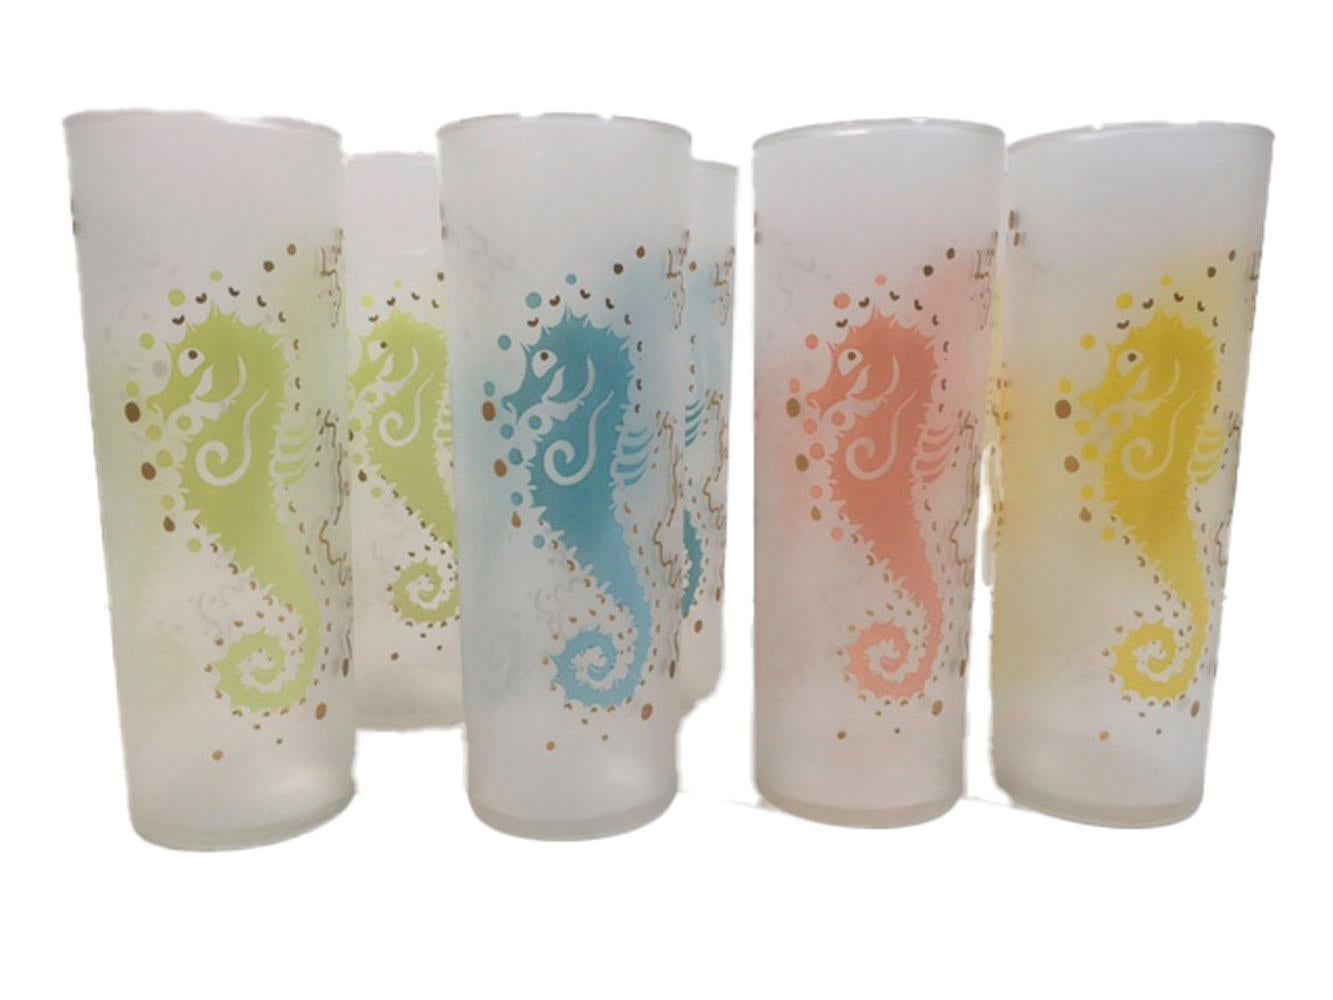 Set of 8 vintage Tom Collins glasses by Federal Glass. Each glass with a seahorse in colored enamel with gold details on a frosted ground. The set of 8 made up of two each of four colors, blue, green, yellow and pink.